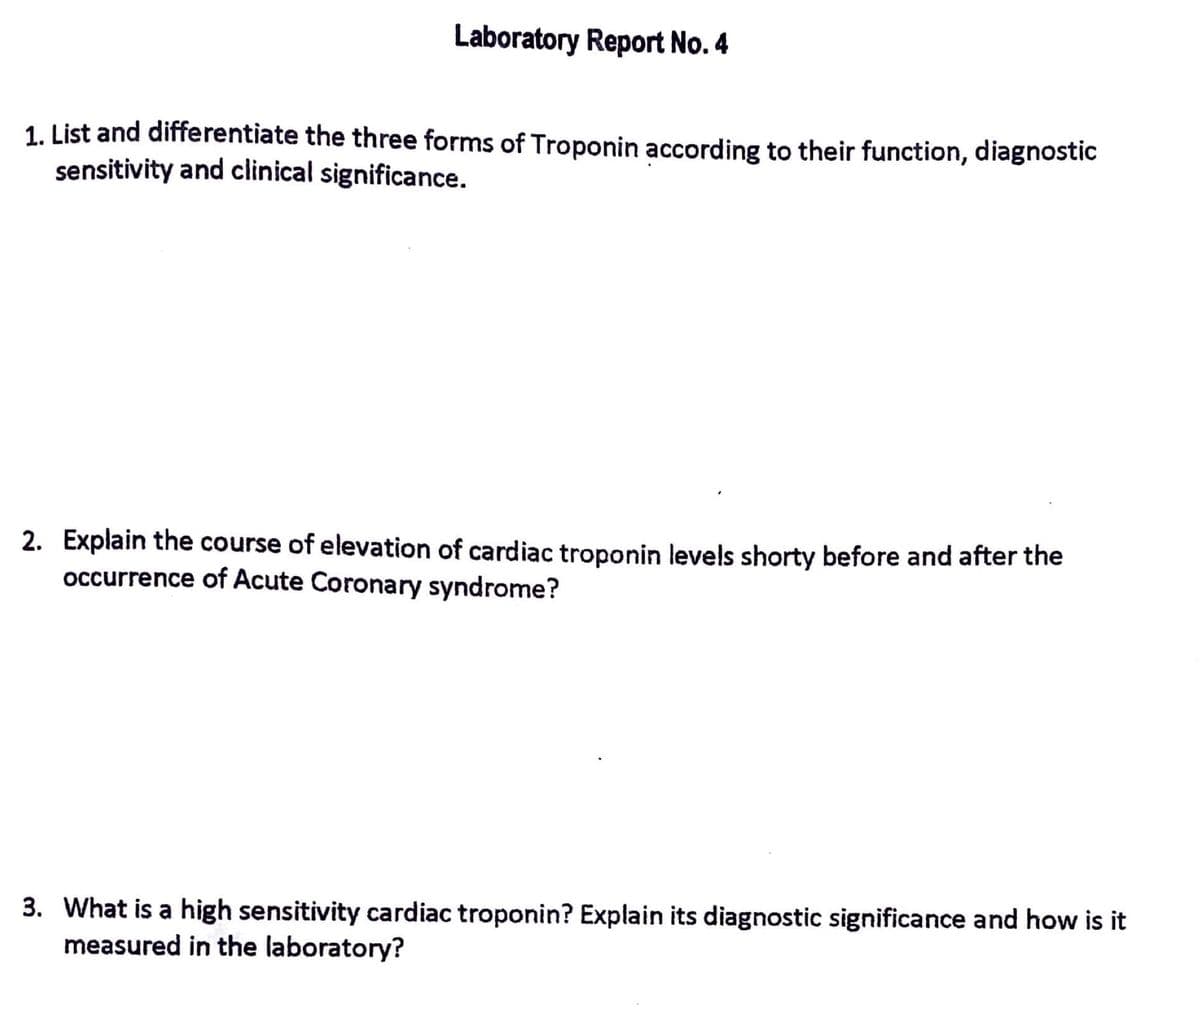 Laboratory Report No. 4
1. List and differentiate the three forms of Troponin according to their function, diagnostic
sensitivity and clinical significance.
2. Explain the course of elevation of cardiac troponin levels shorty before and after the
occurrence of Acute Coronary syndrome?
3. What is a high sensitivity cardiac troponin? Explain its diagnostic significance and how is it
measured in the laboratory?